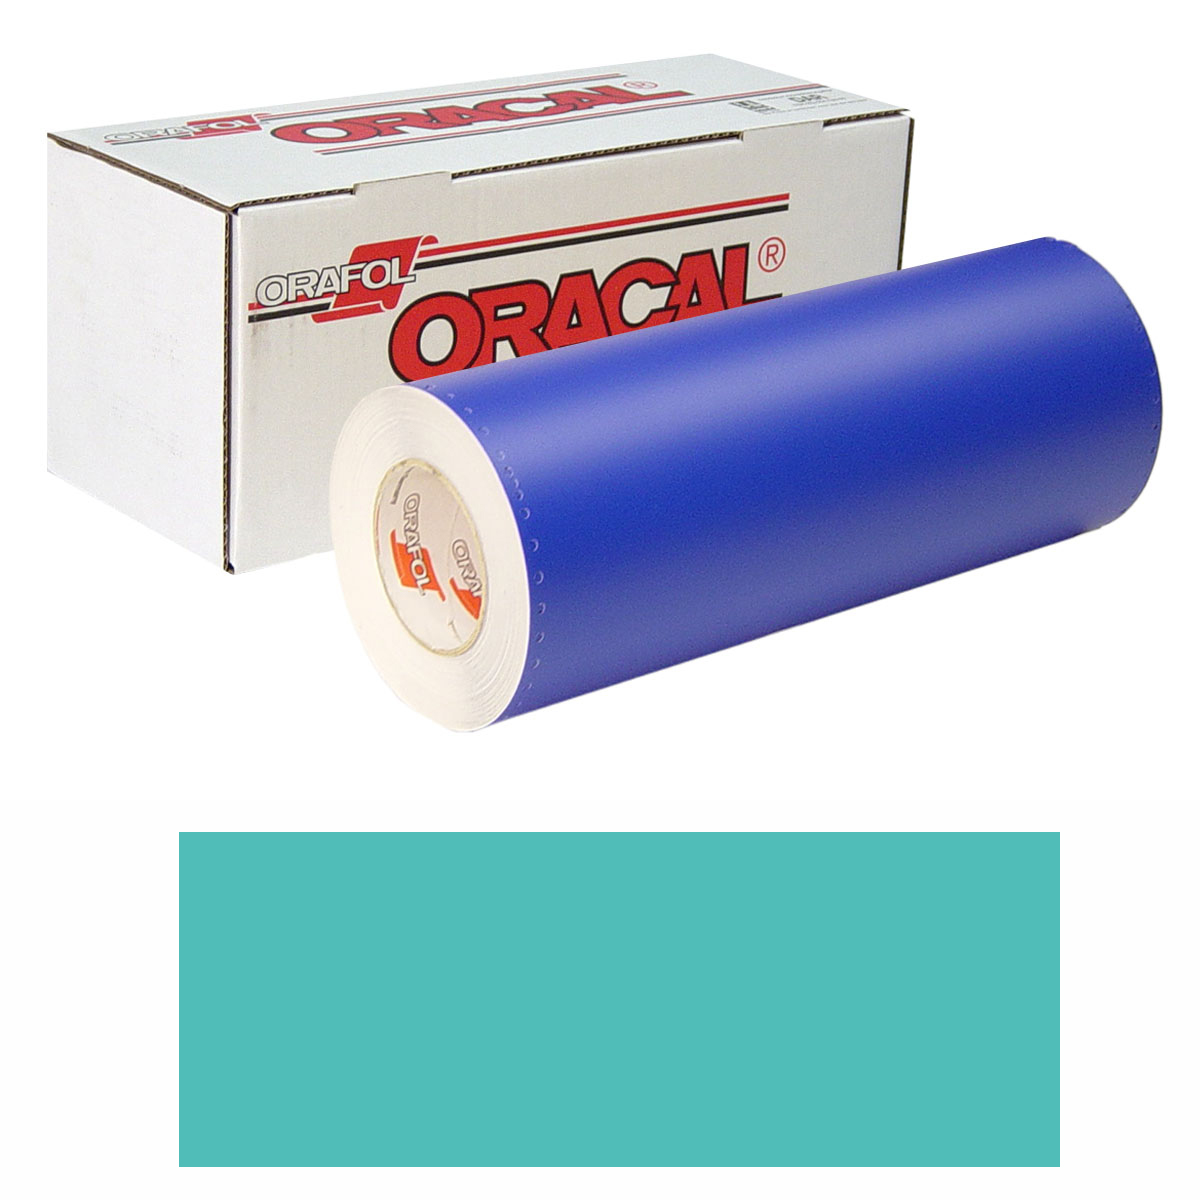 ORACAL 8300 15in X 10yd 054 Turquoise